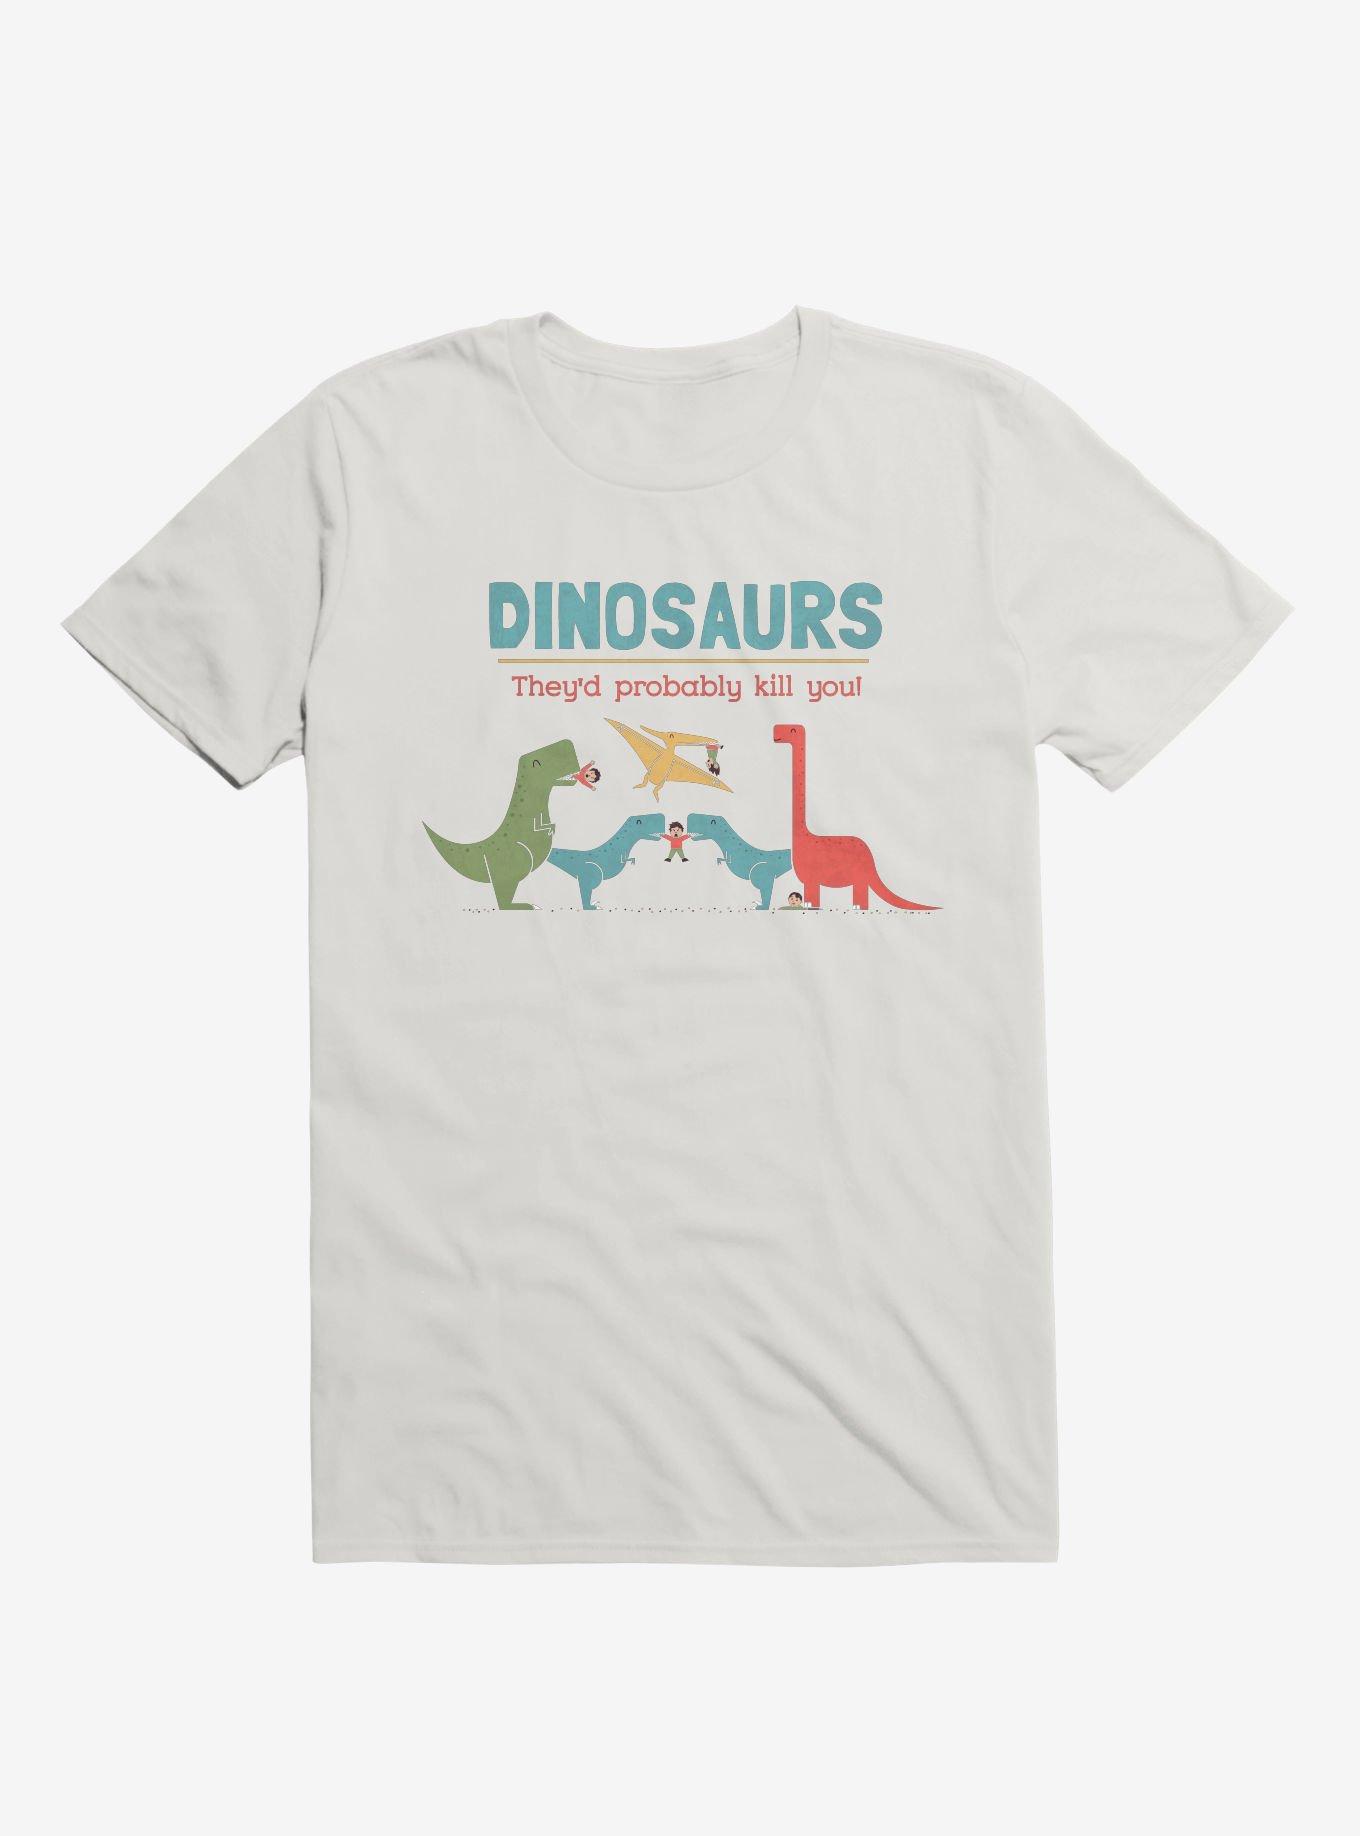 Fact Dinosaurs They'd Probably Kill You! White T-Shirt, WHITE, hi-res